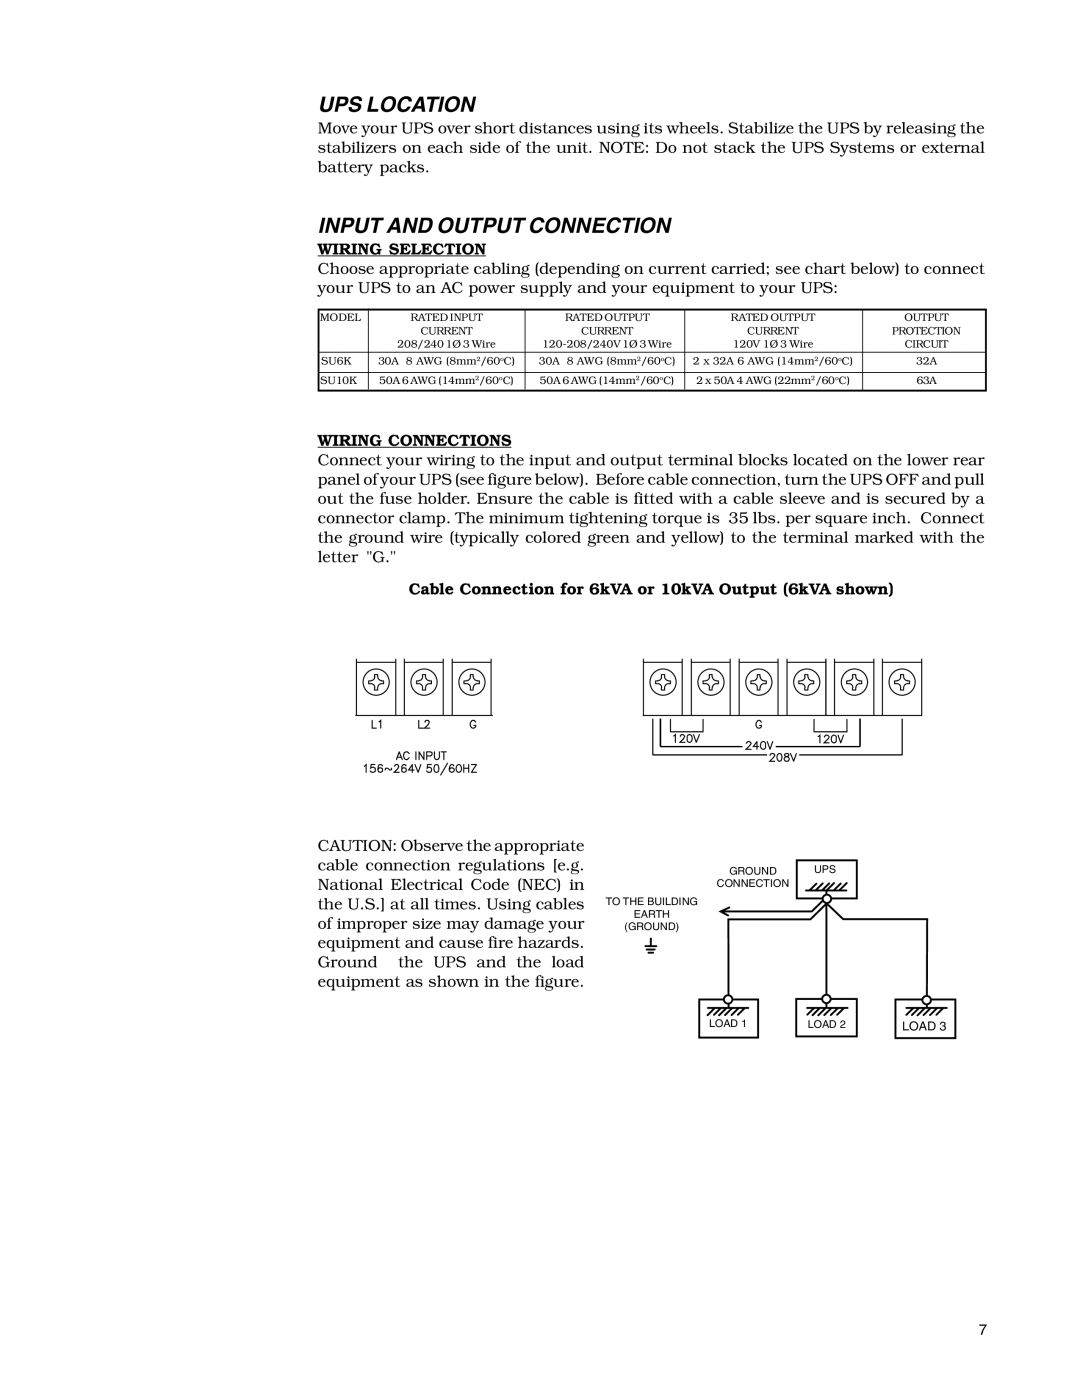 Tripp Lite SU10K owner manual UPS Location, Input and Output Connection, Wiring Selection, Wiring Connections 